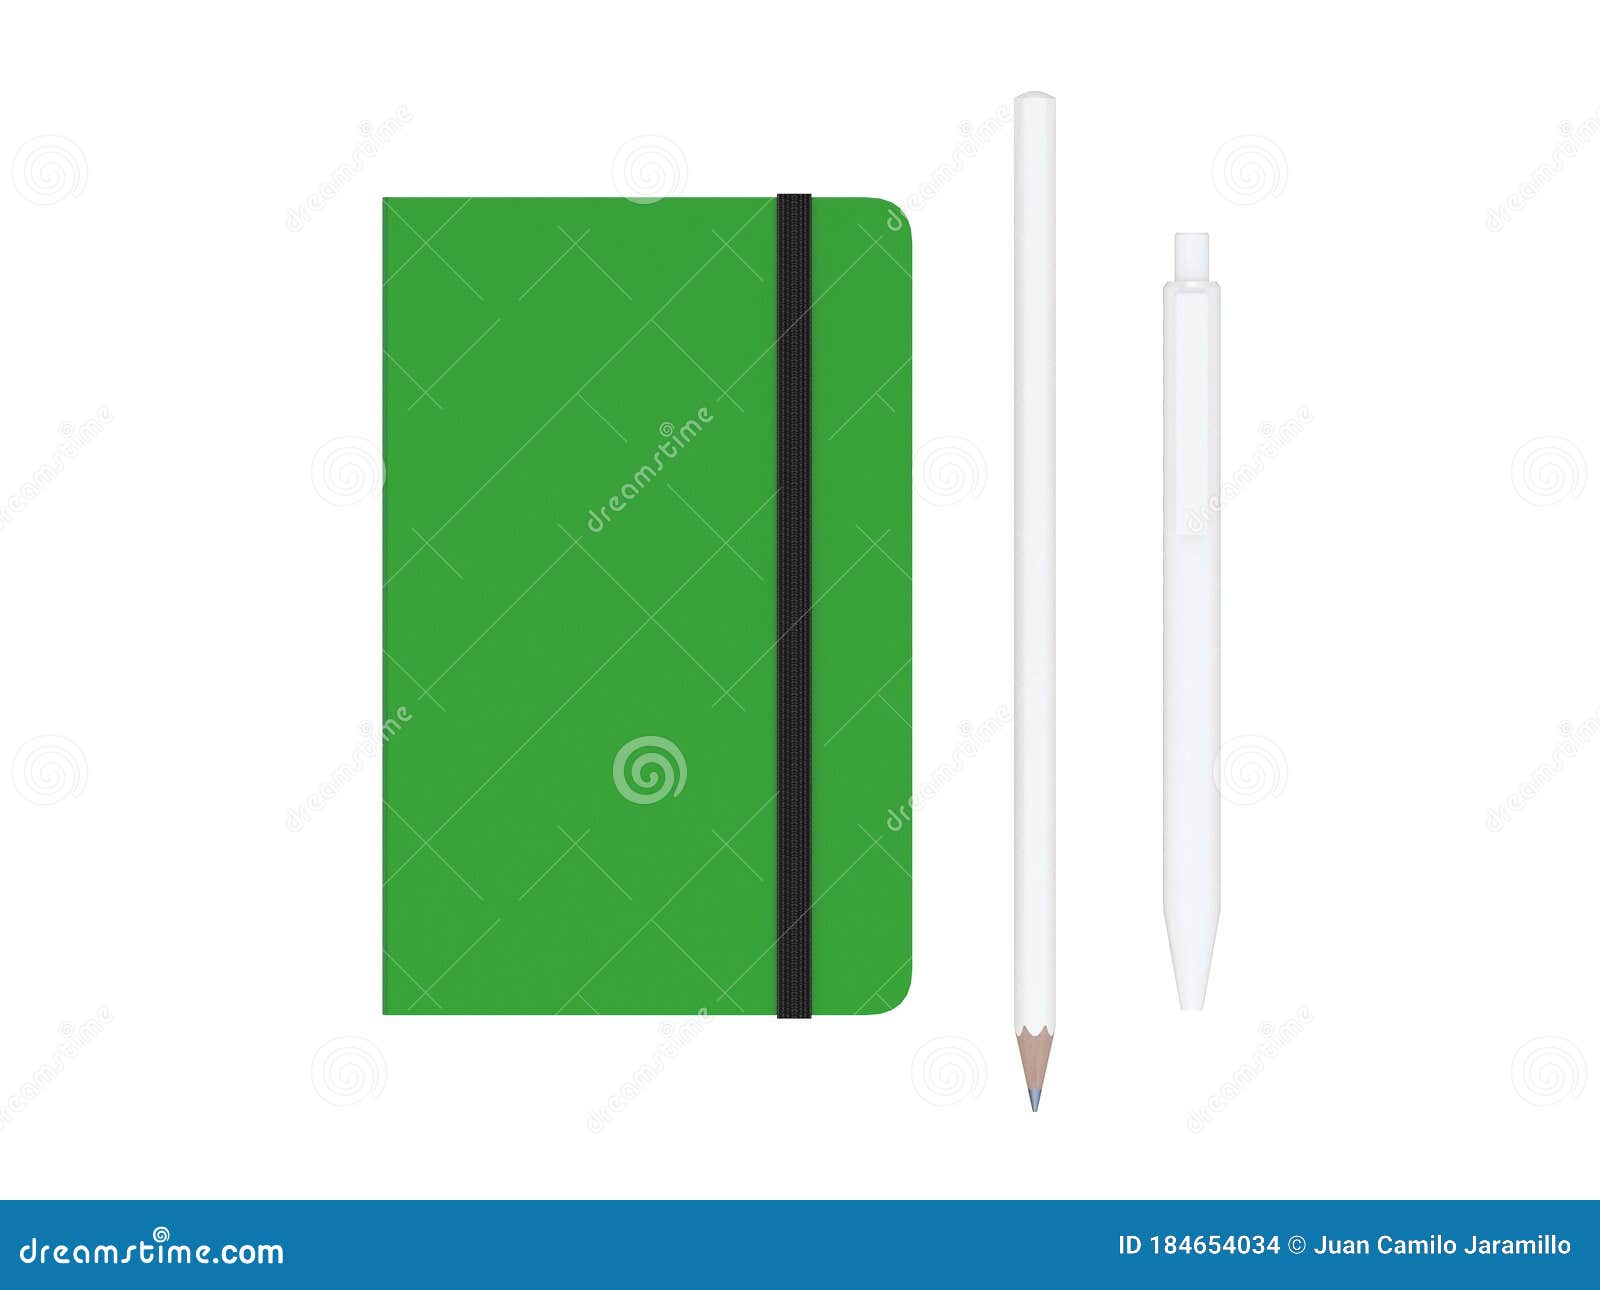 green moleskine with pen and pencil and a black strap front or top view  on a white background 3d rendering